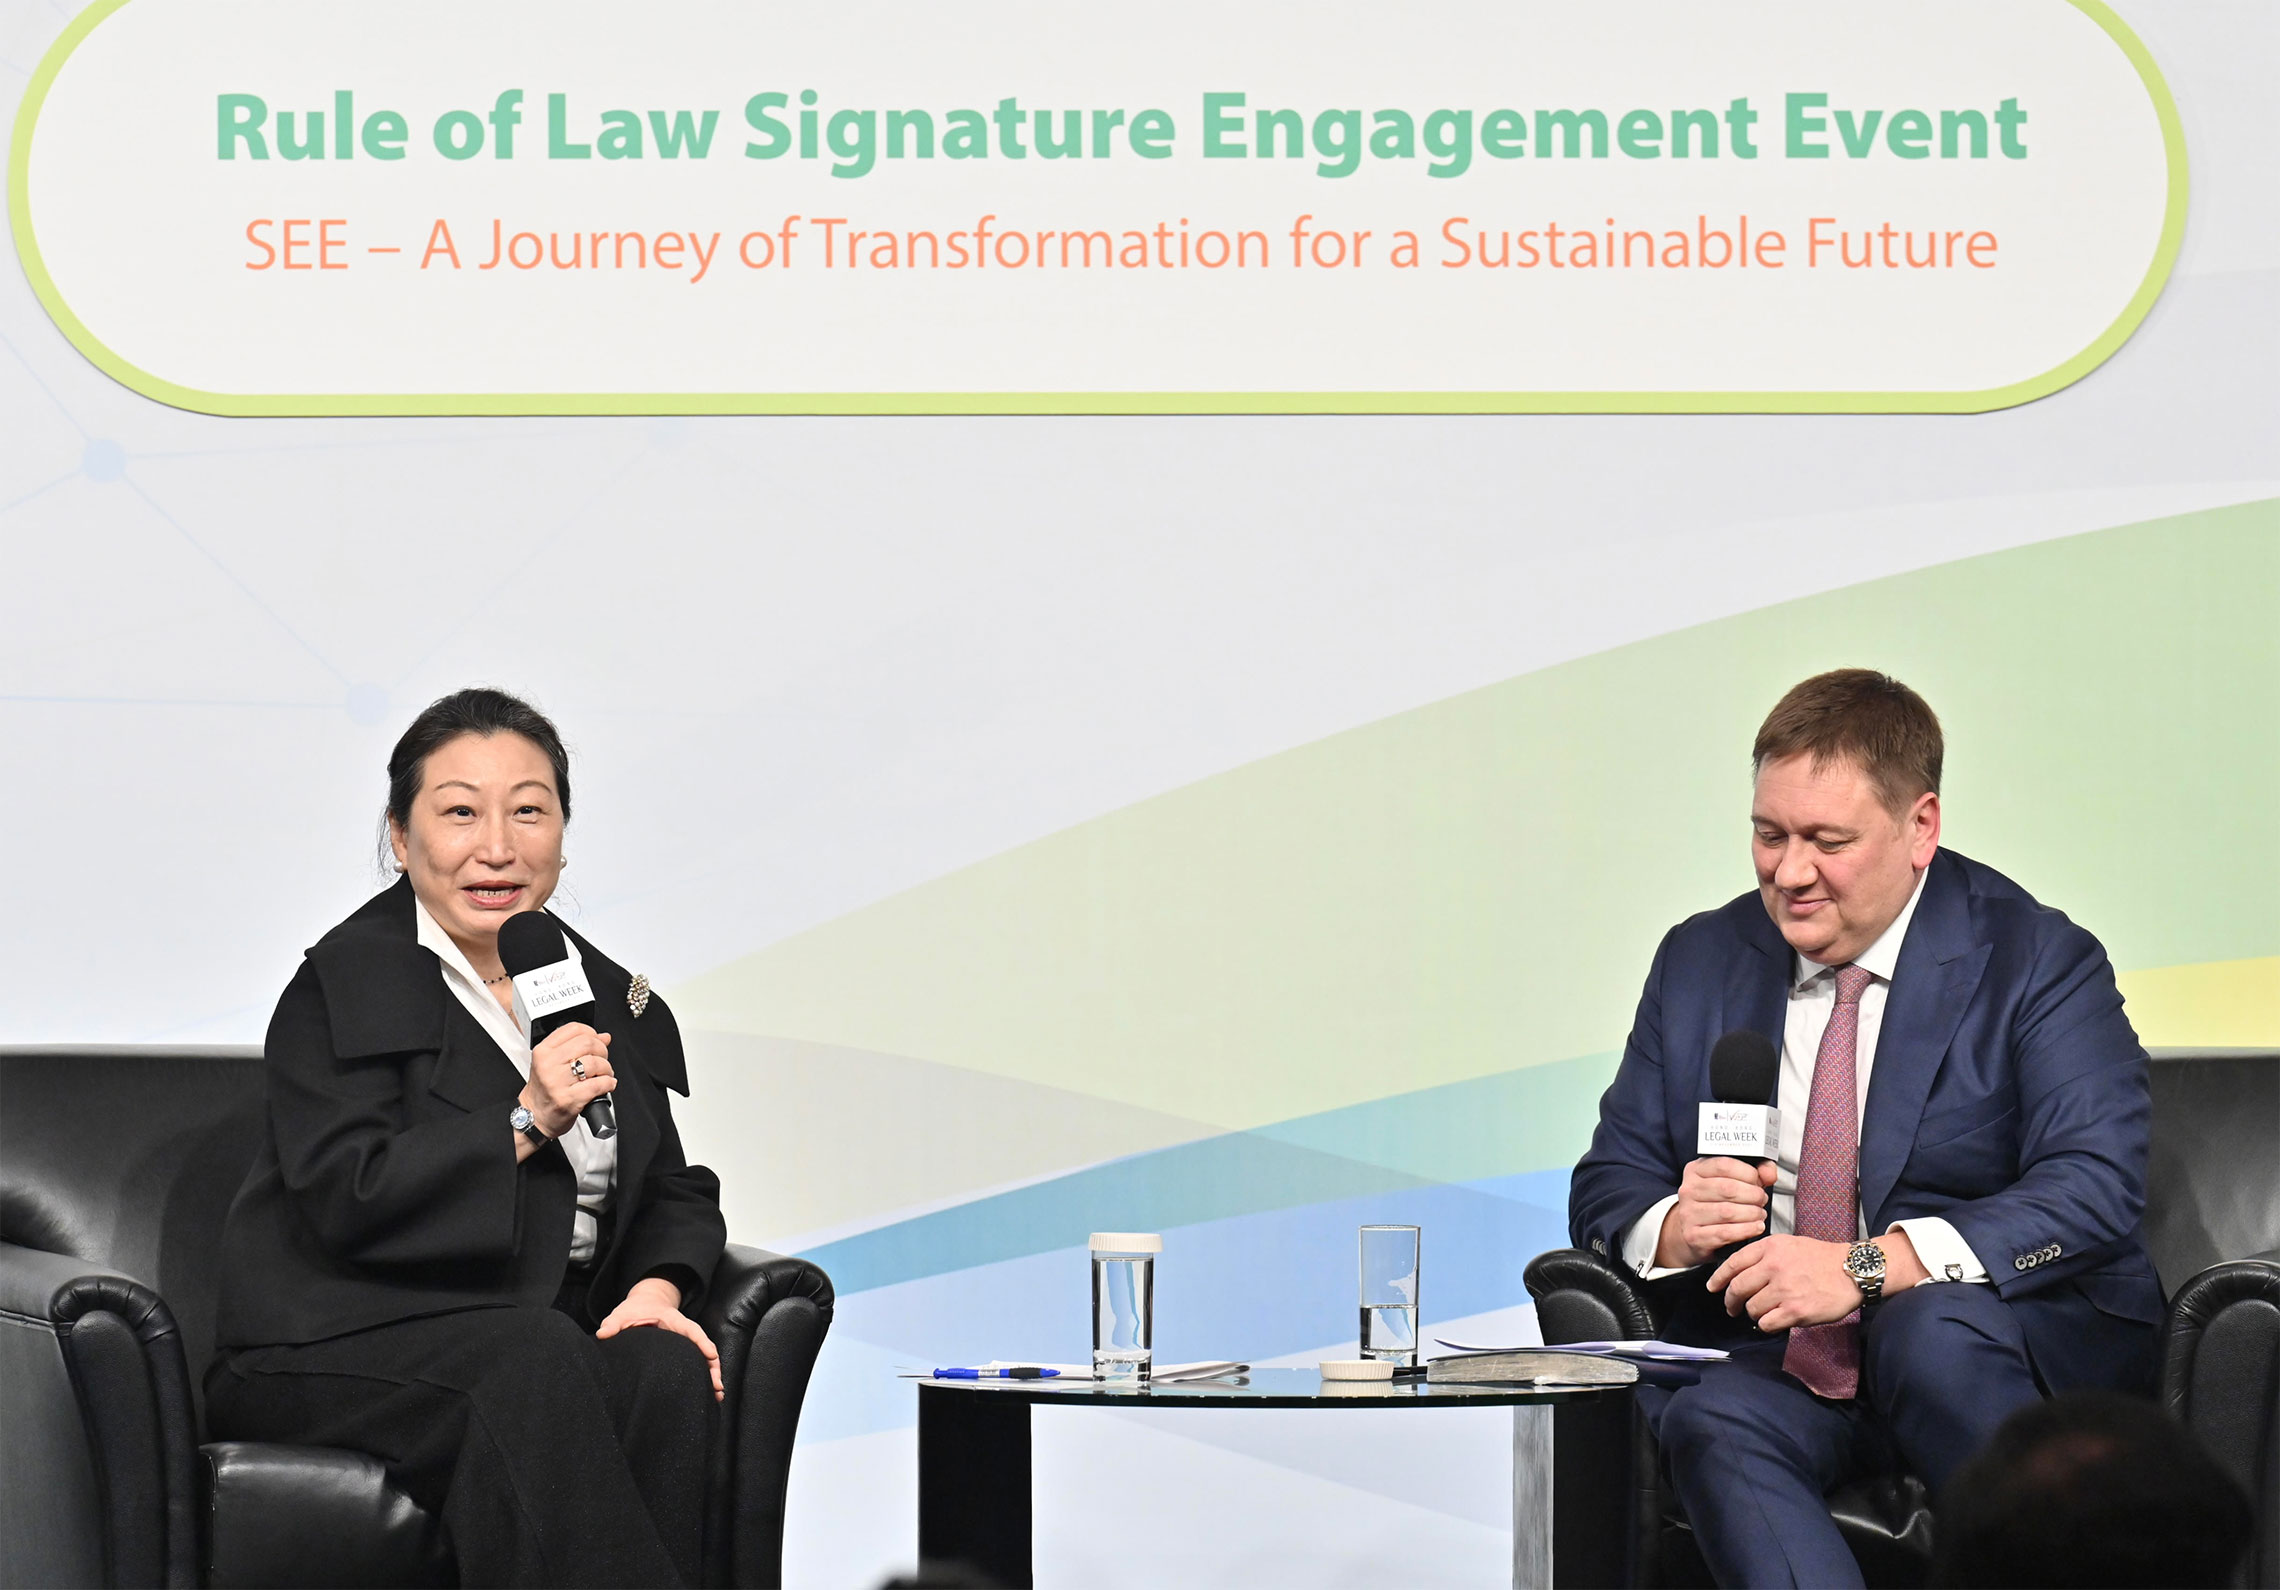 The Chief Justice of the Court of Final Appeal, Mr Andrew Cheung Kui-nung, speaks at the Rule of Law Signature Engagement Event: “A Journey of Transformation for a Sustainable Future” under Hong Kong Legal Week 2021 today (November 5).